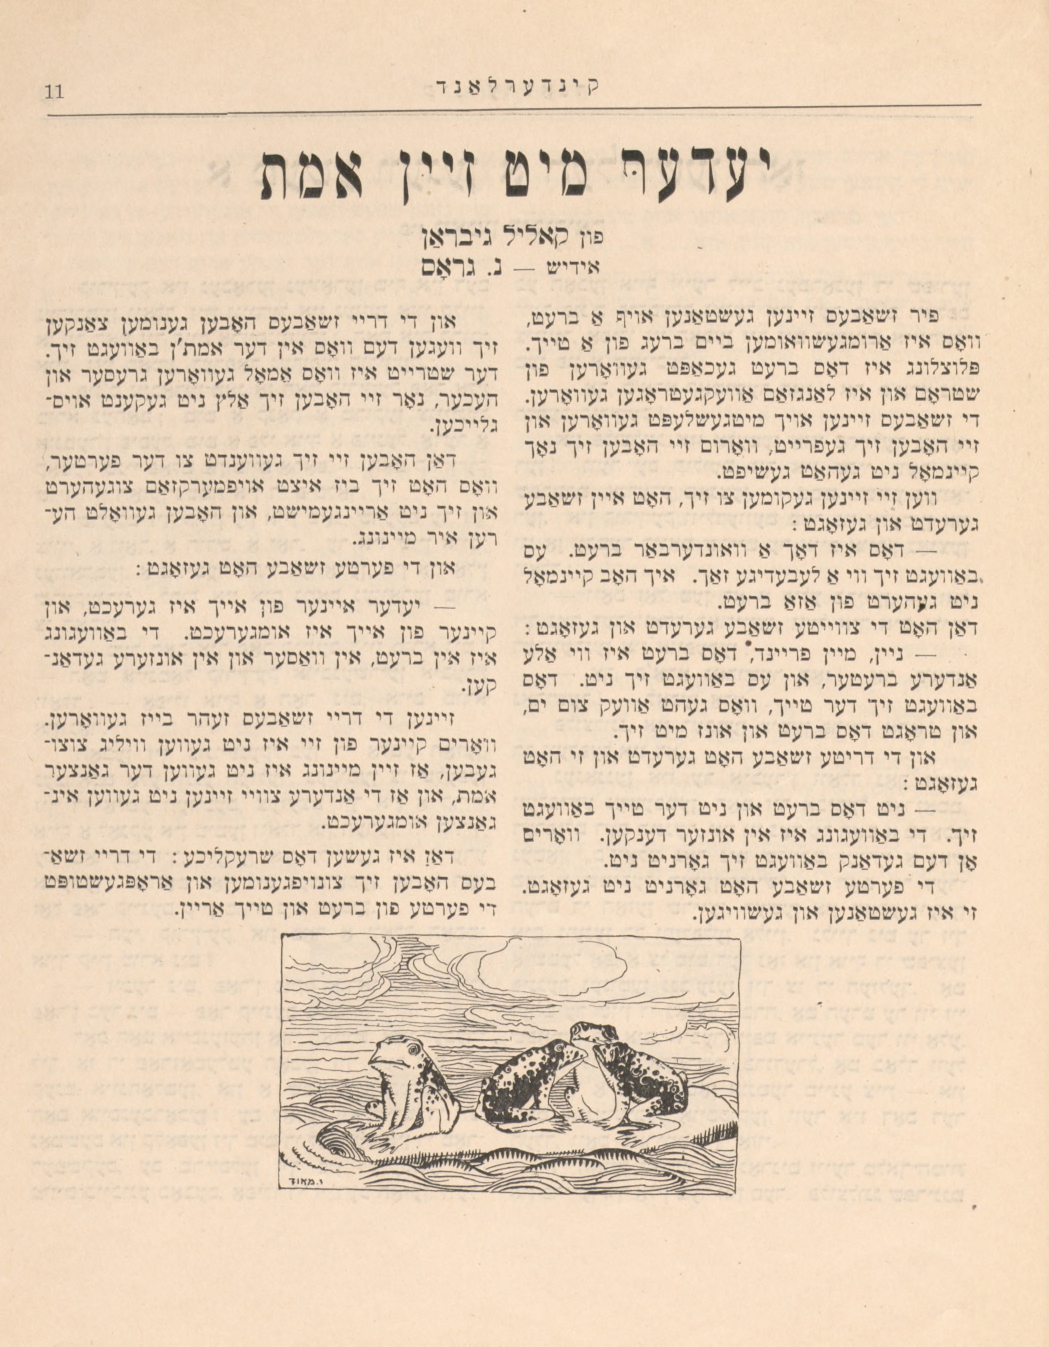 Each One and his Truth by Kahlil Gibran, translated into Yiddish by Naftali Gross, Kinderland, Vol. 1, No. 4, April, 1921, p. 11.